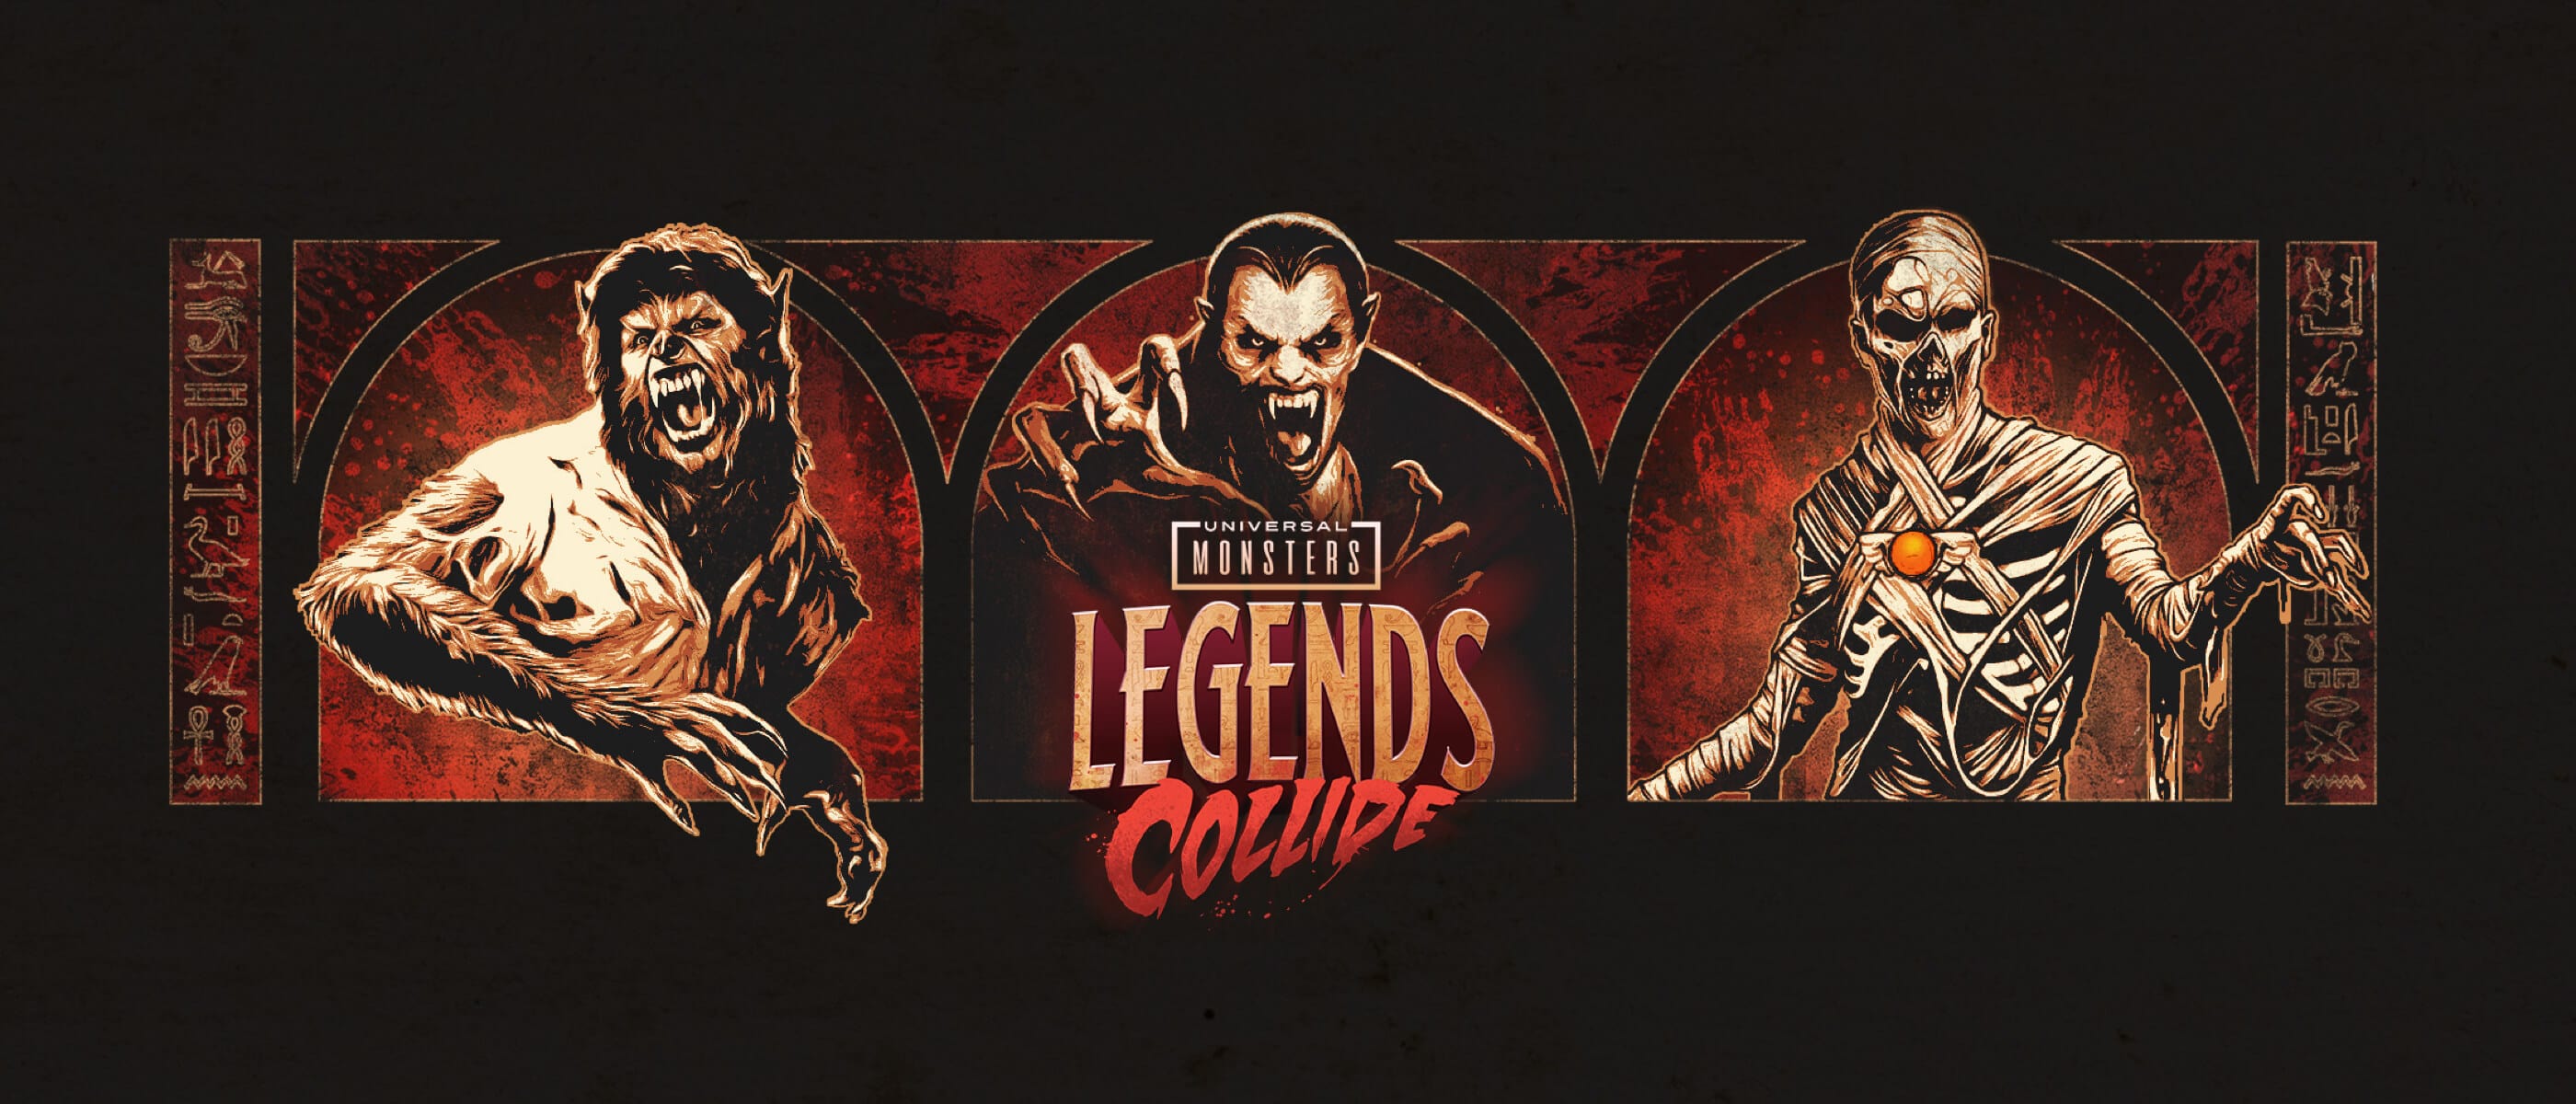 Iconic monster movie characters Dracula, The Wolf Man and The Mummy surrounded by hieroglyphics with the Universal Monsters: Legends Collide logo.